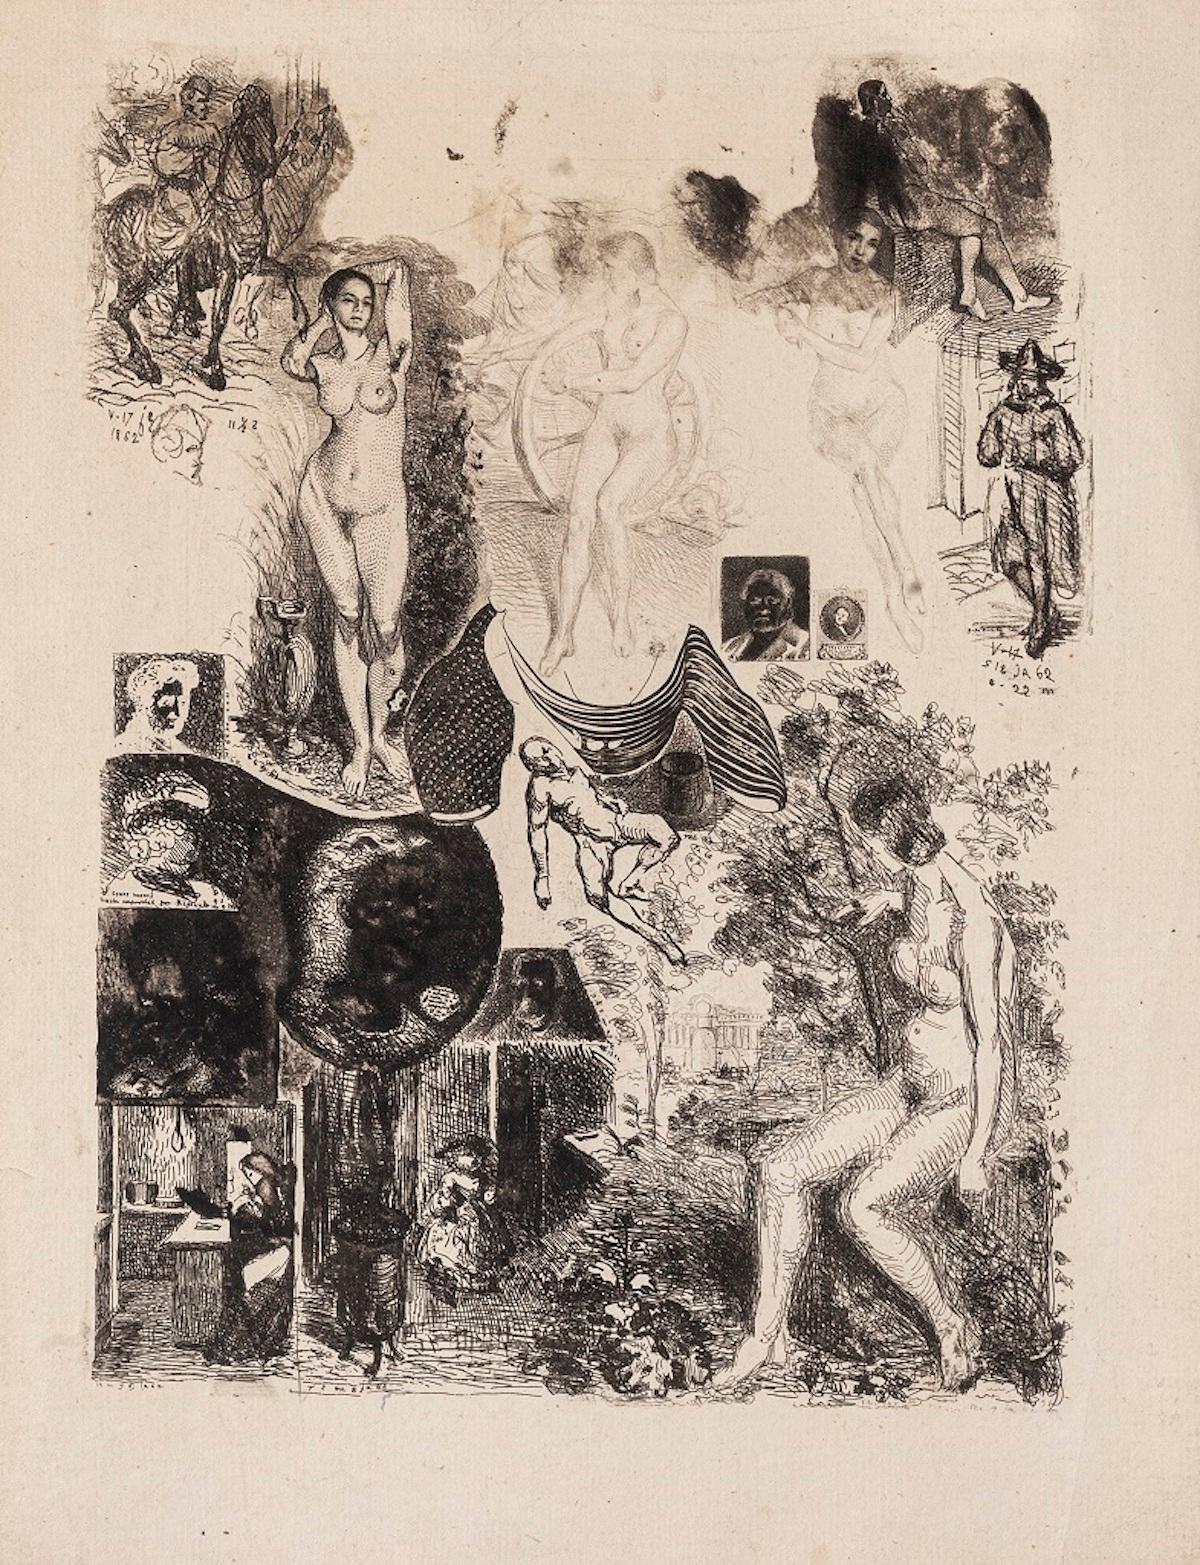 Composition with Nudes - Original Etching - 1862